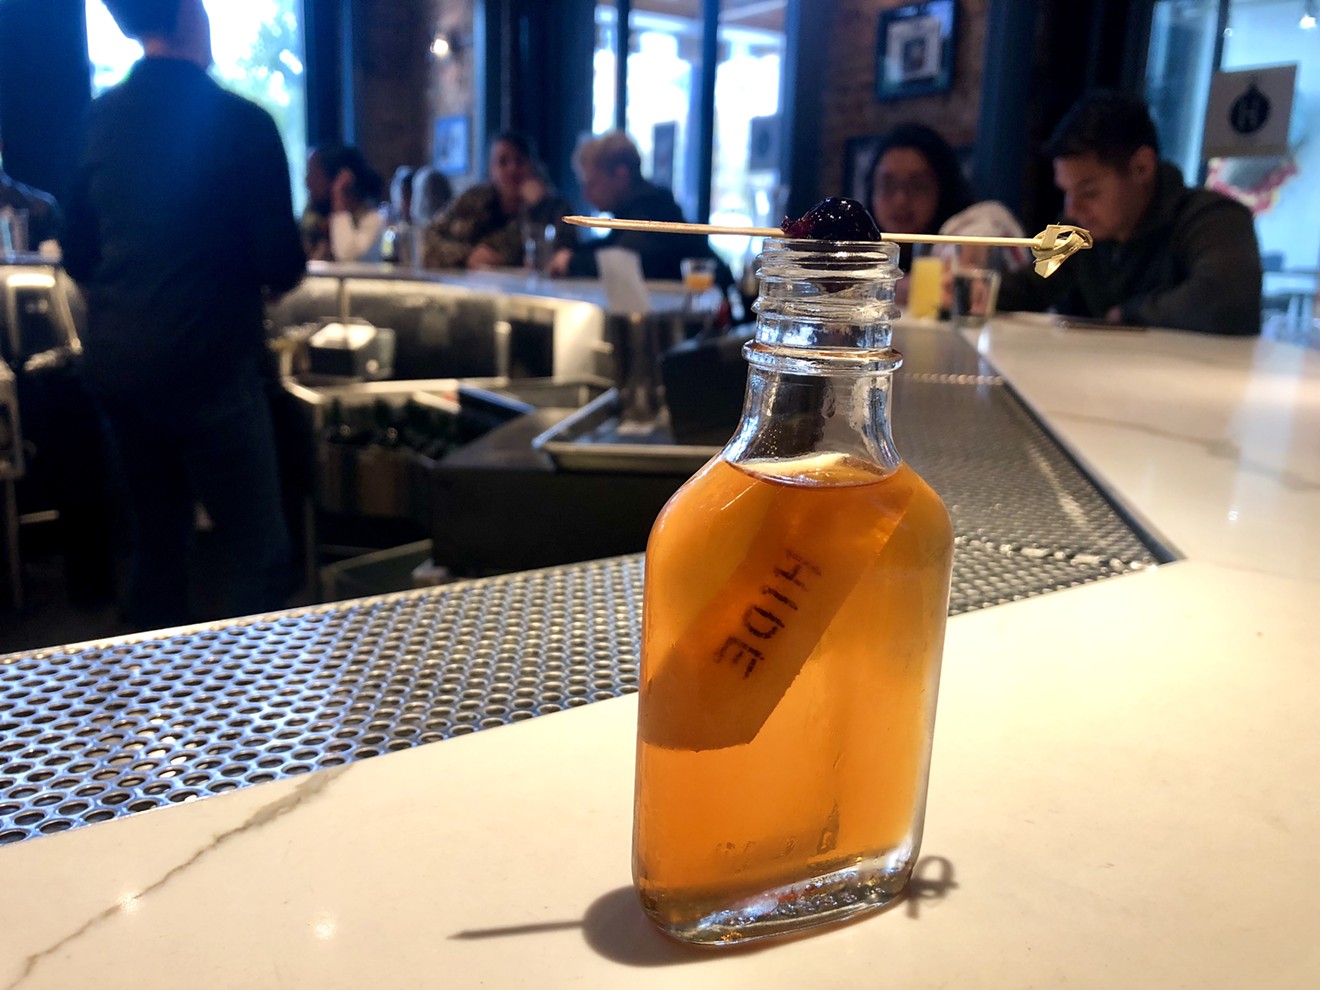 The cocktails are the best part of Hide’s menu. The old fashioned ($11) comes prepared in a jar. A fortune cookie-like paper floats in the cocktail, reading “Hide” in case you forget where you’re drinking.